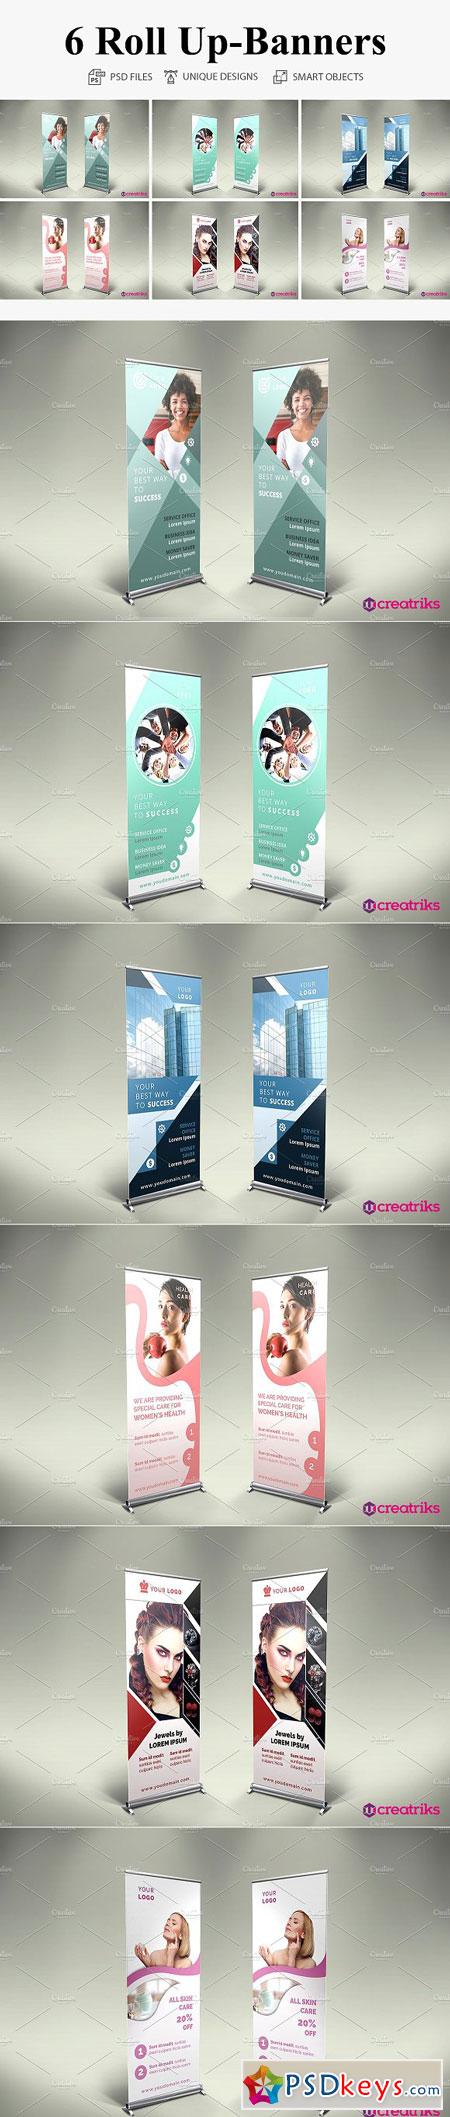 6 Roll Up Banners 2912694